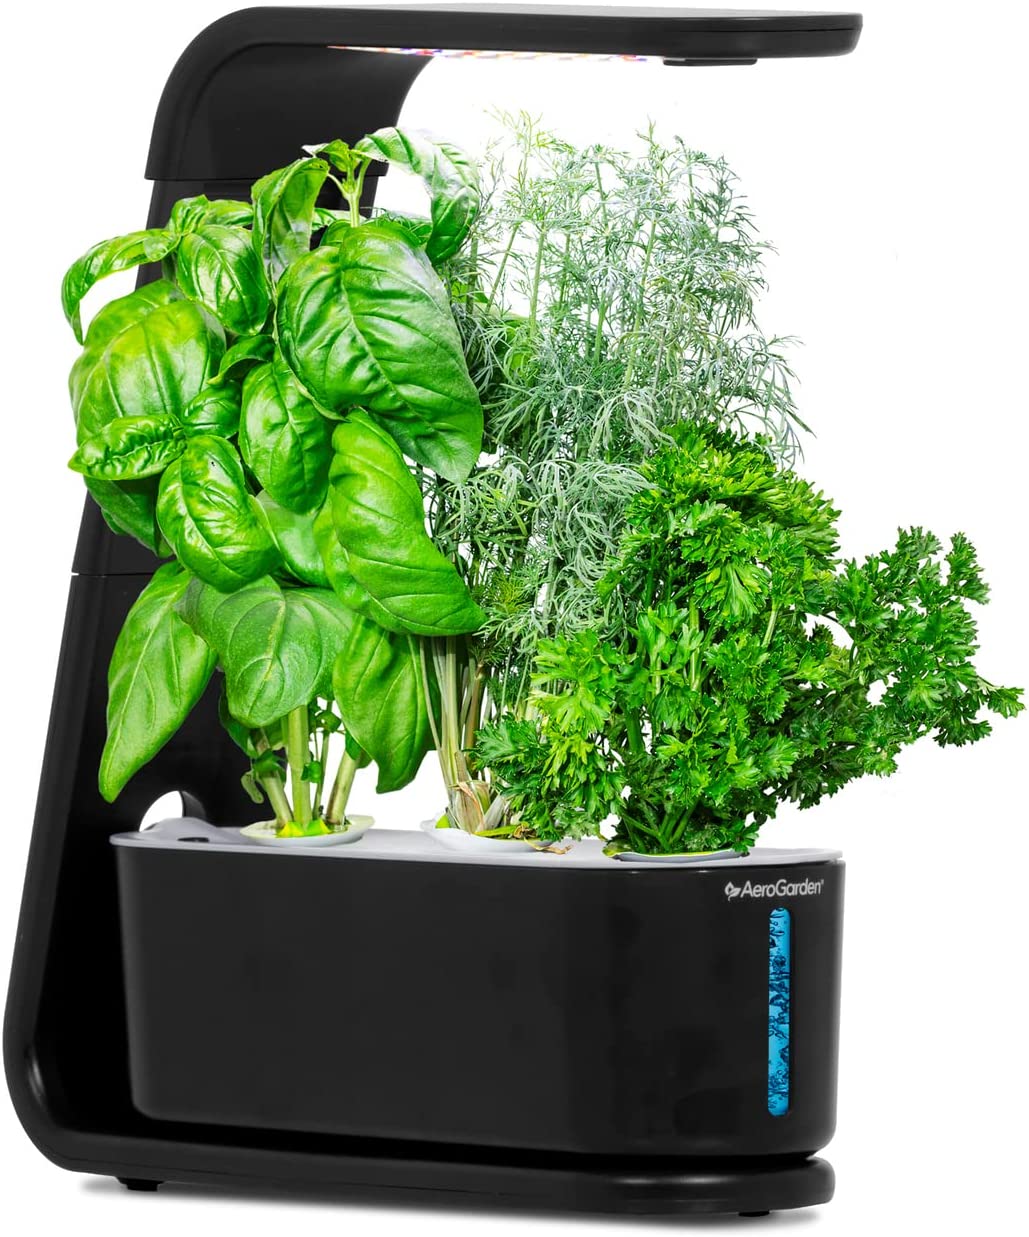 AeroGarden Sprout - Hydroponic Indoor Garden for Only $49.99 on Amazon!